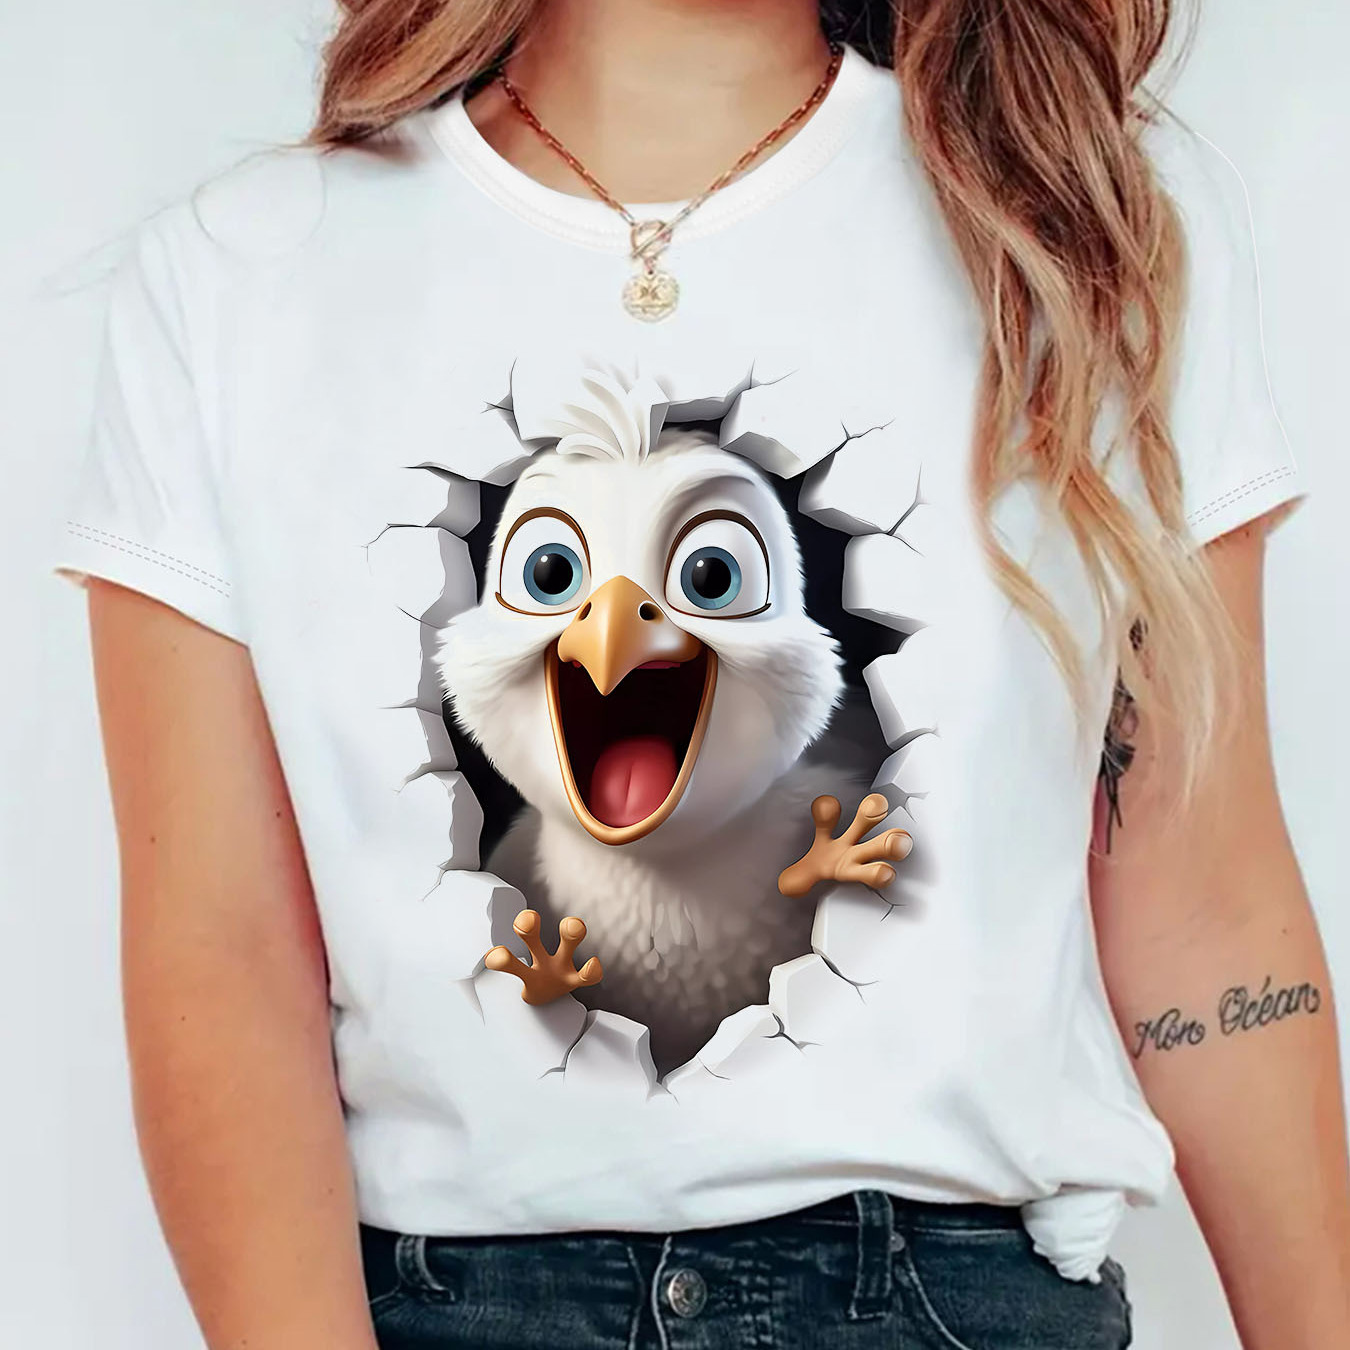 

Funny Bird Print Crew Neck T-shirt, Short Sleeve Casual Top For Summer & Spring, Women's Clothing